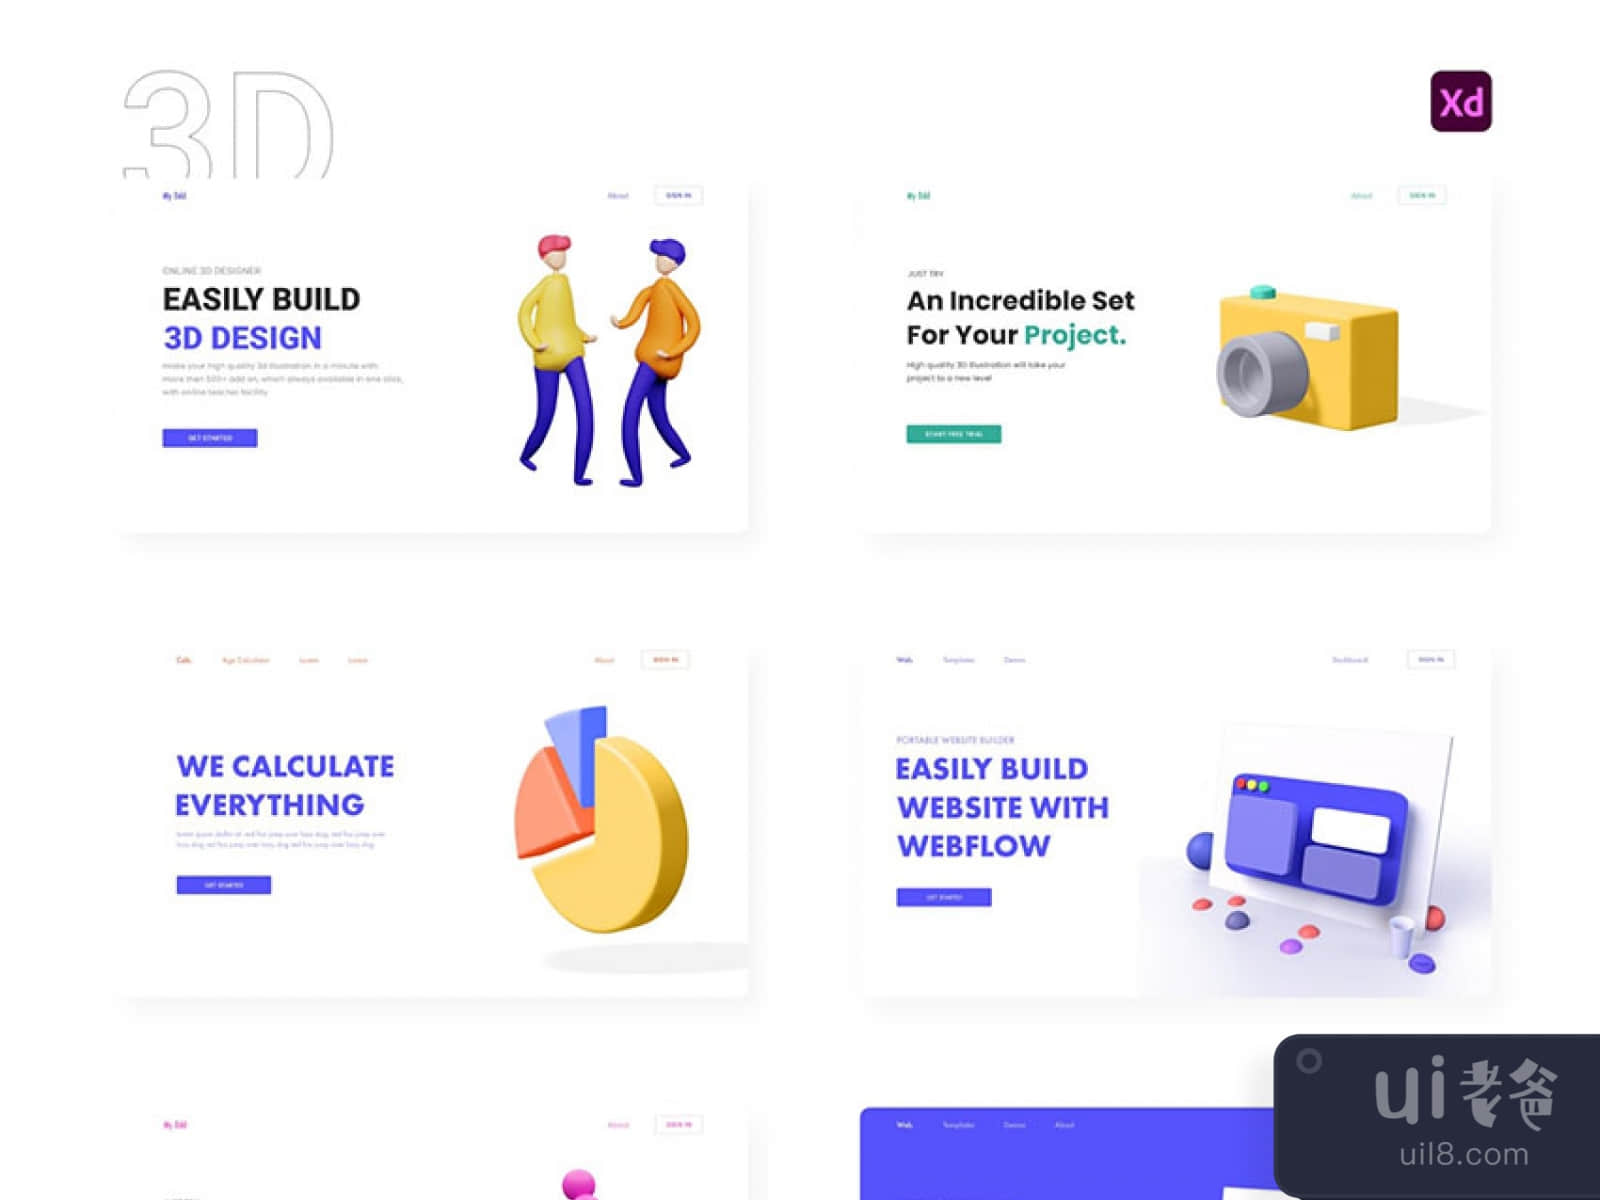 42 Landing page concepts for Figma and Adobe XD No 1